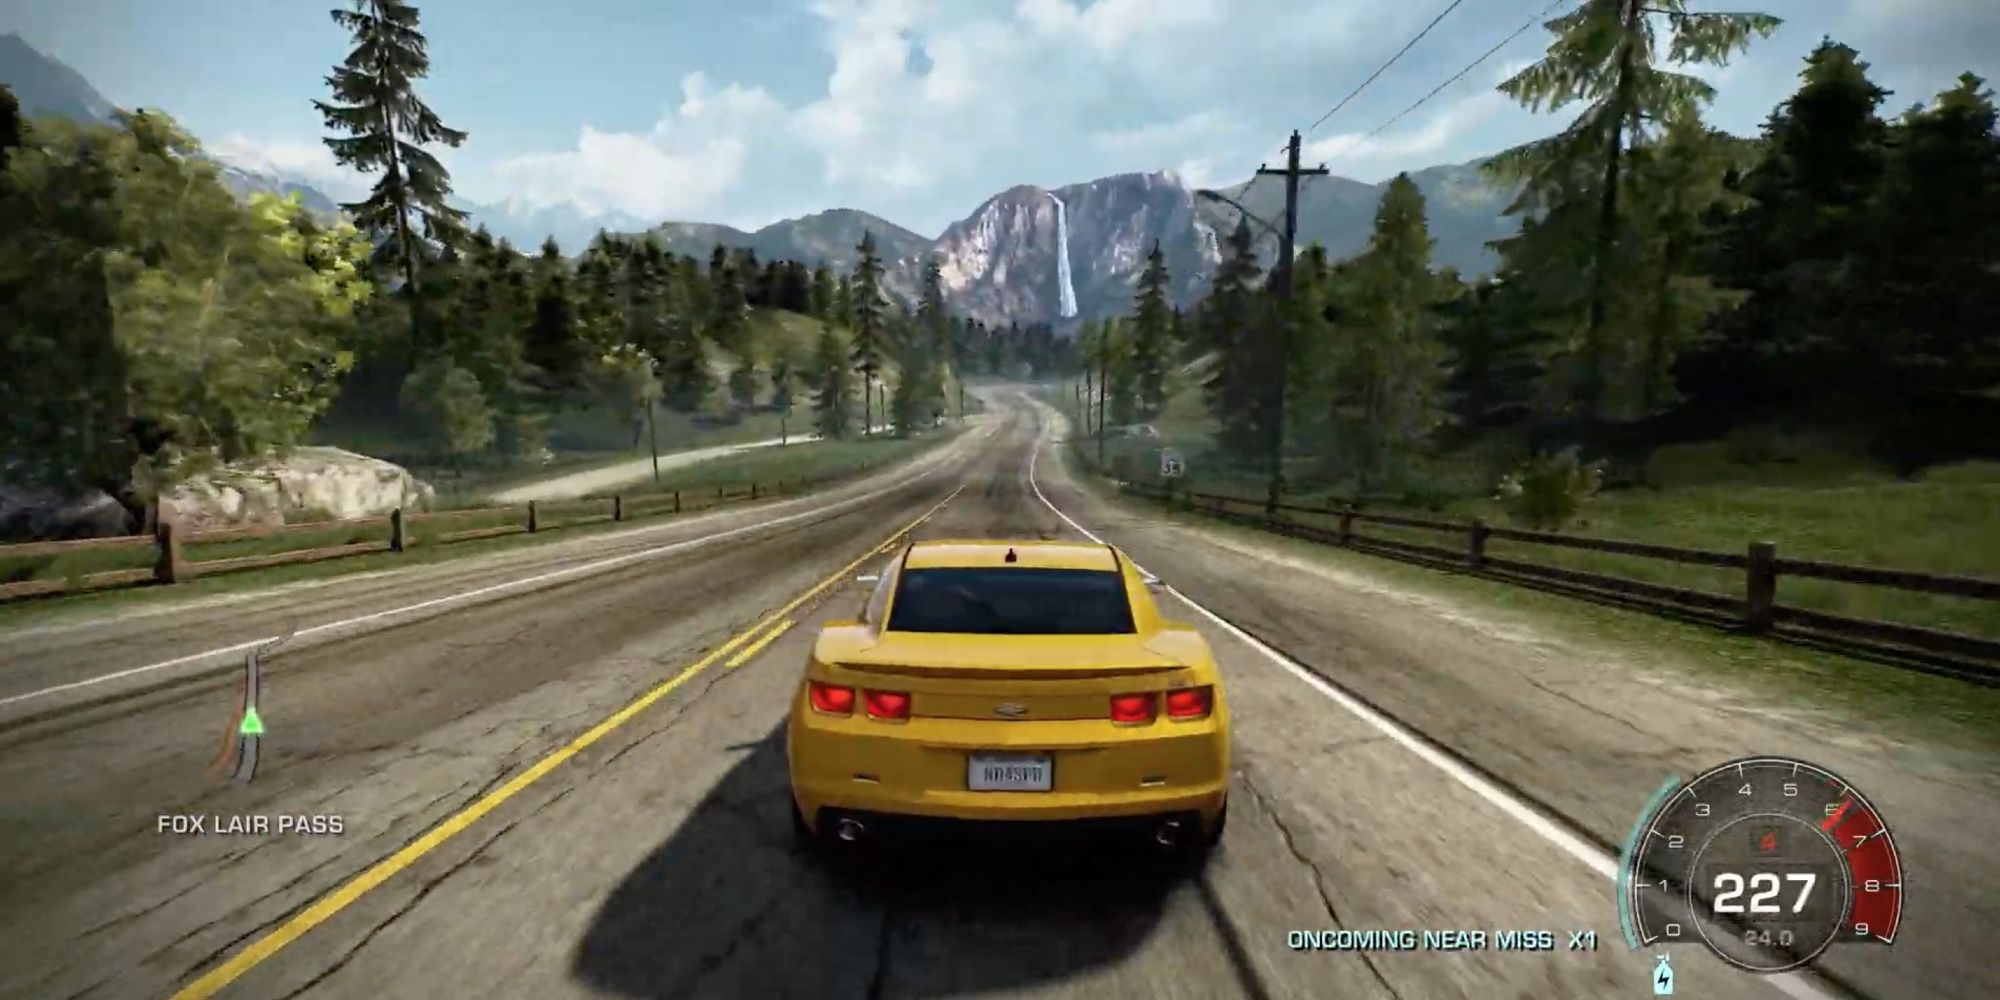 Realistic Racing Games - Need For Speed Hot Pursuit - Chevrolet Camaro SS driving smoothly